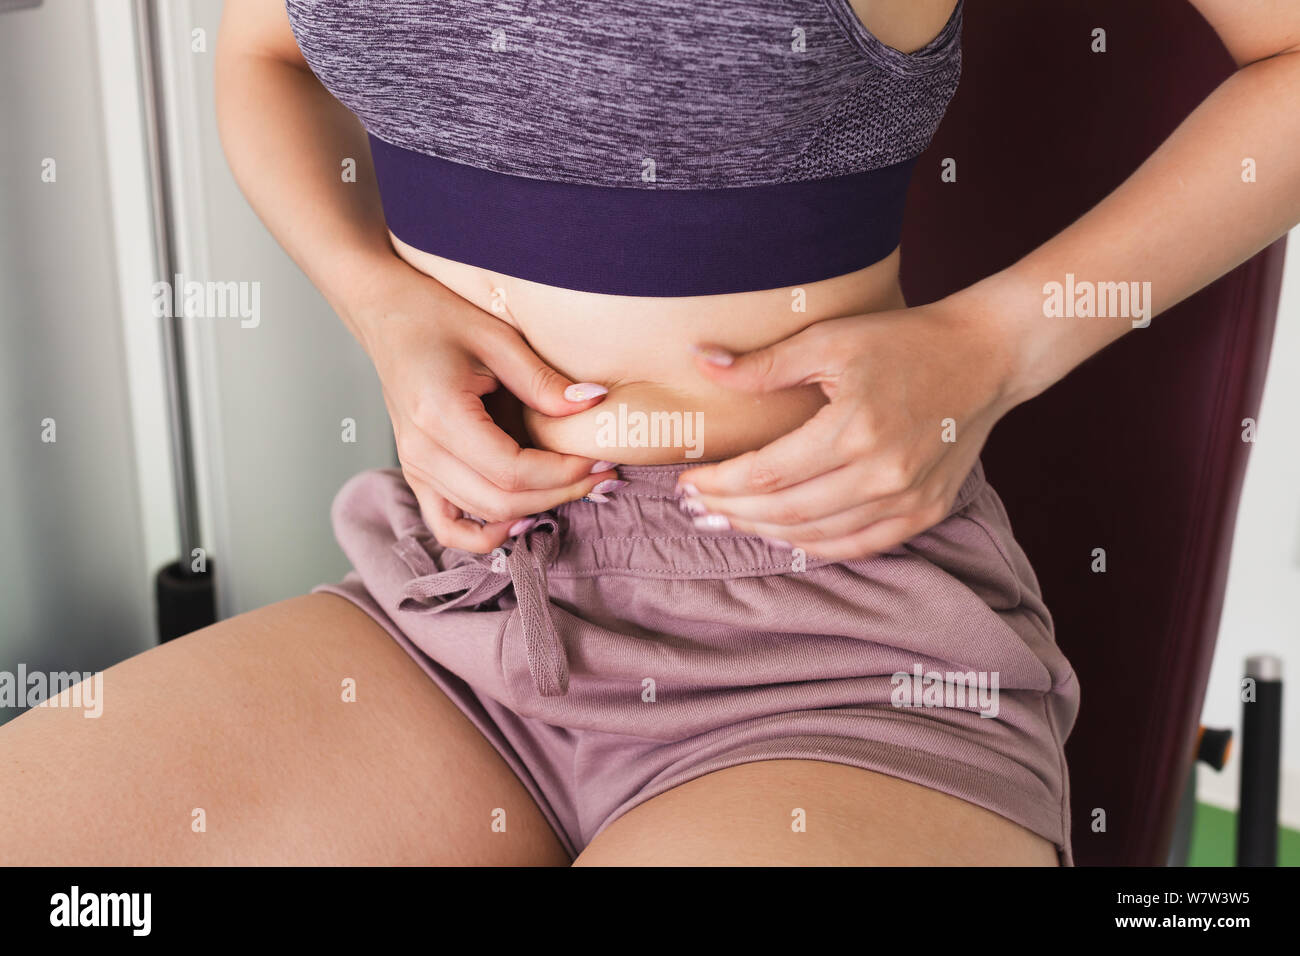 Young girl pinched herself at the waist to test fat level under skin. Skin fold test Stock Photo